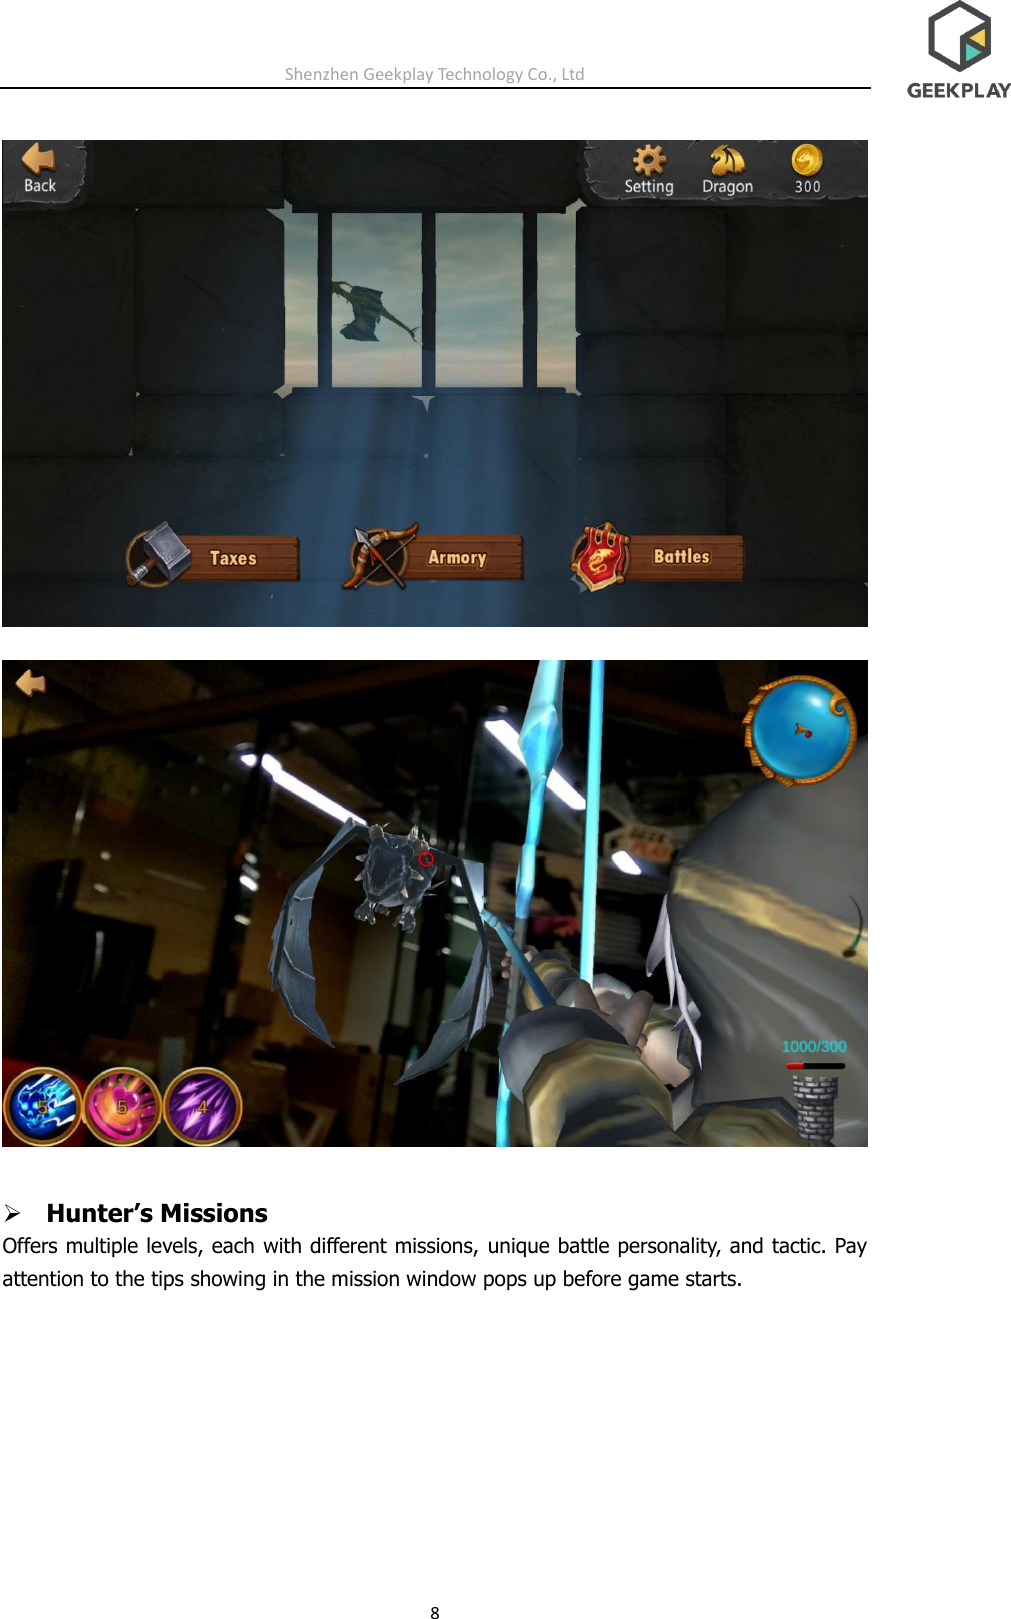 Shenzhen Geekplay Technology Co., Ltd 8    ➢ Hunter’s Missions Offers multiple levels, each with different missions, unique battle personality, and tactic. Pay attention to the tips showing in the mission window pops up before game starts. 